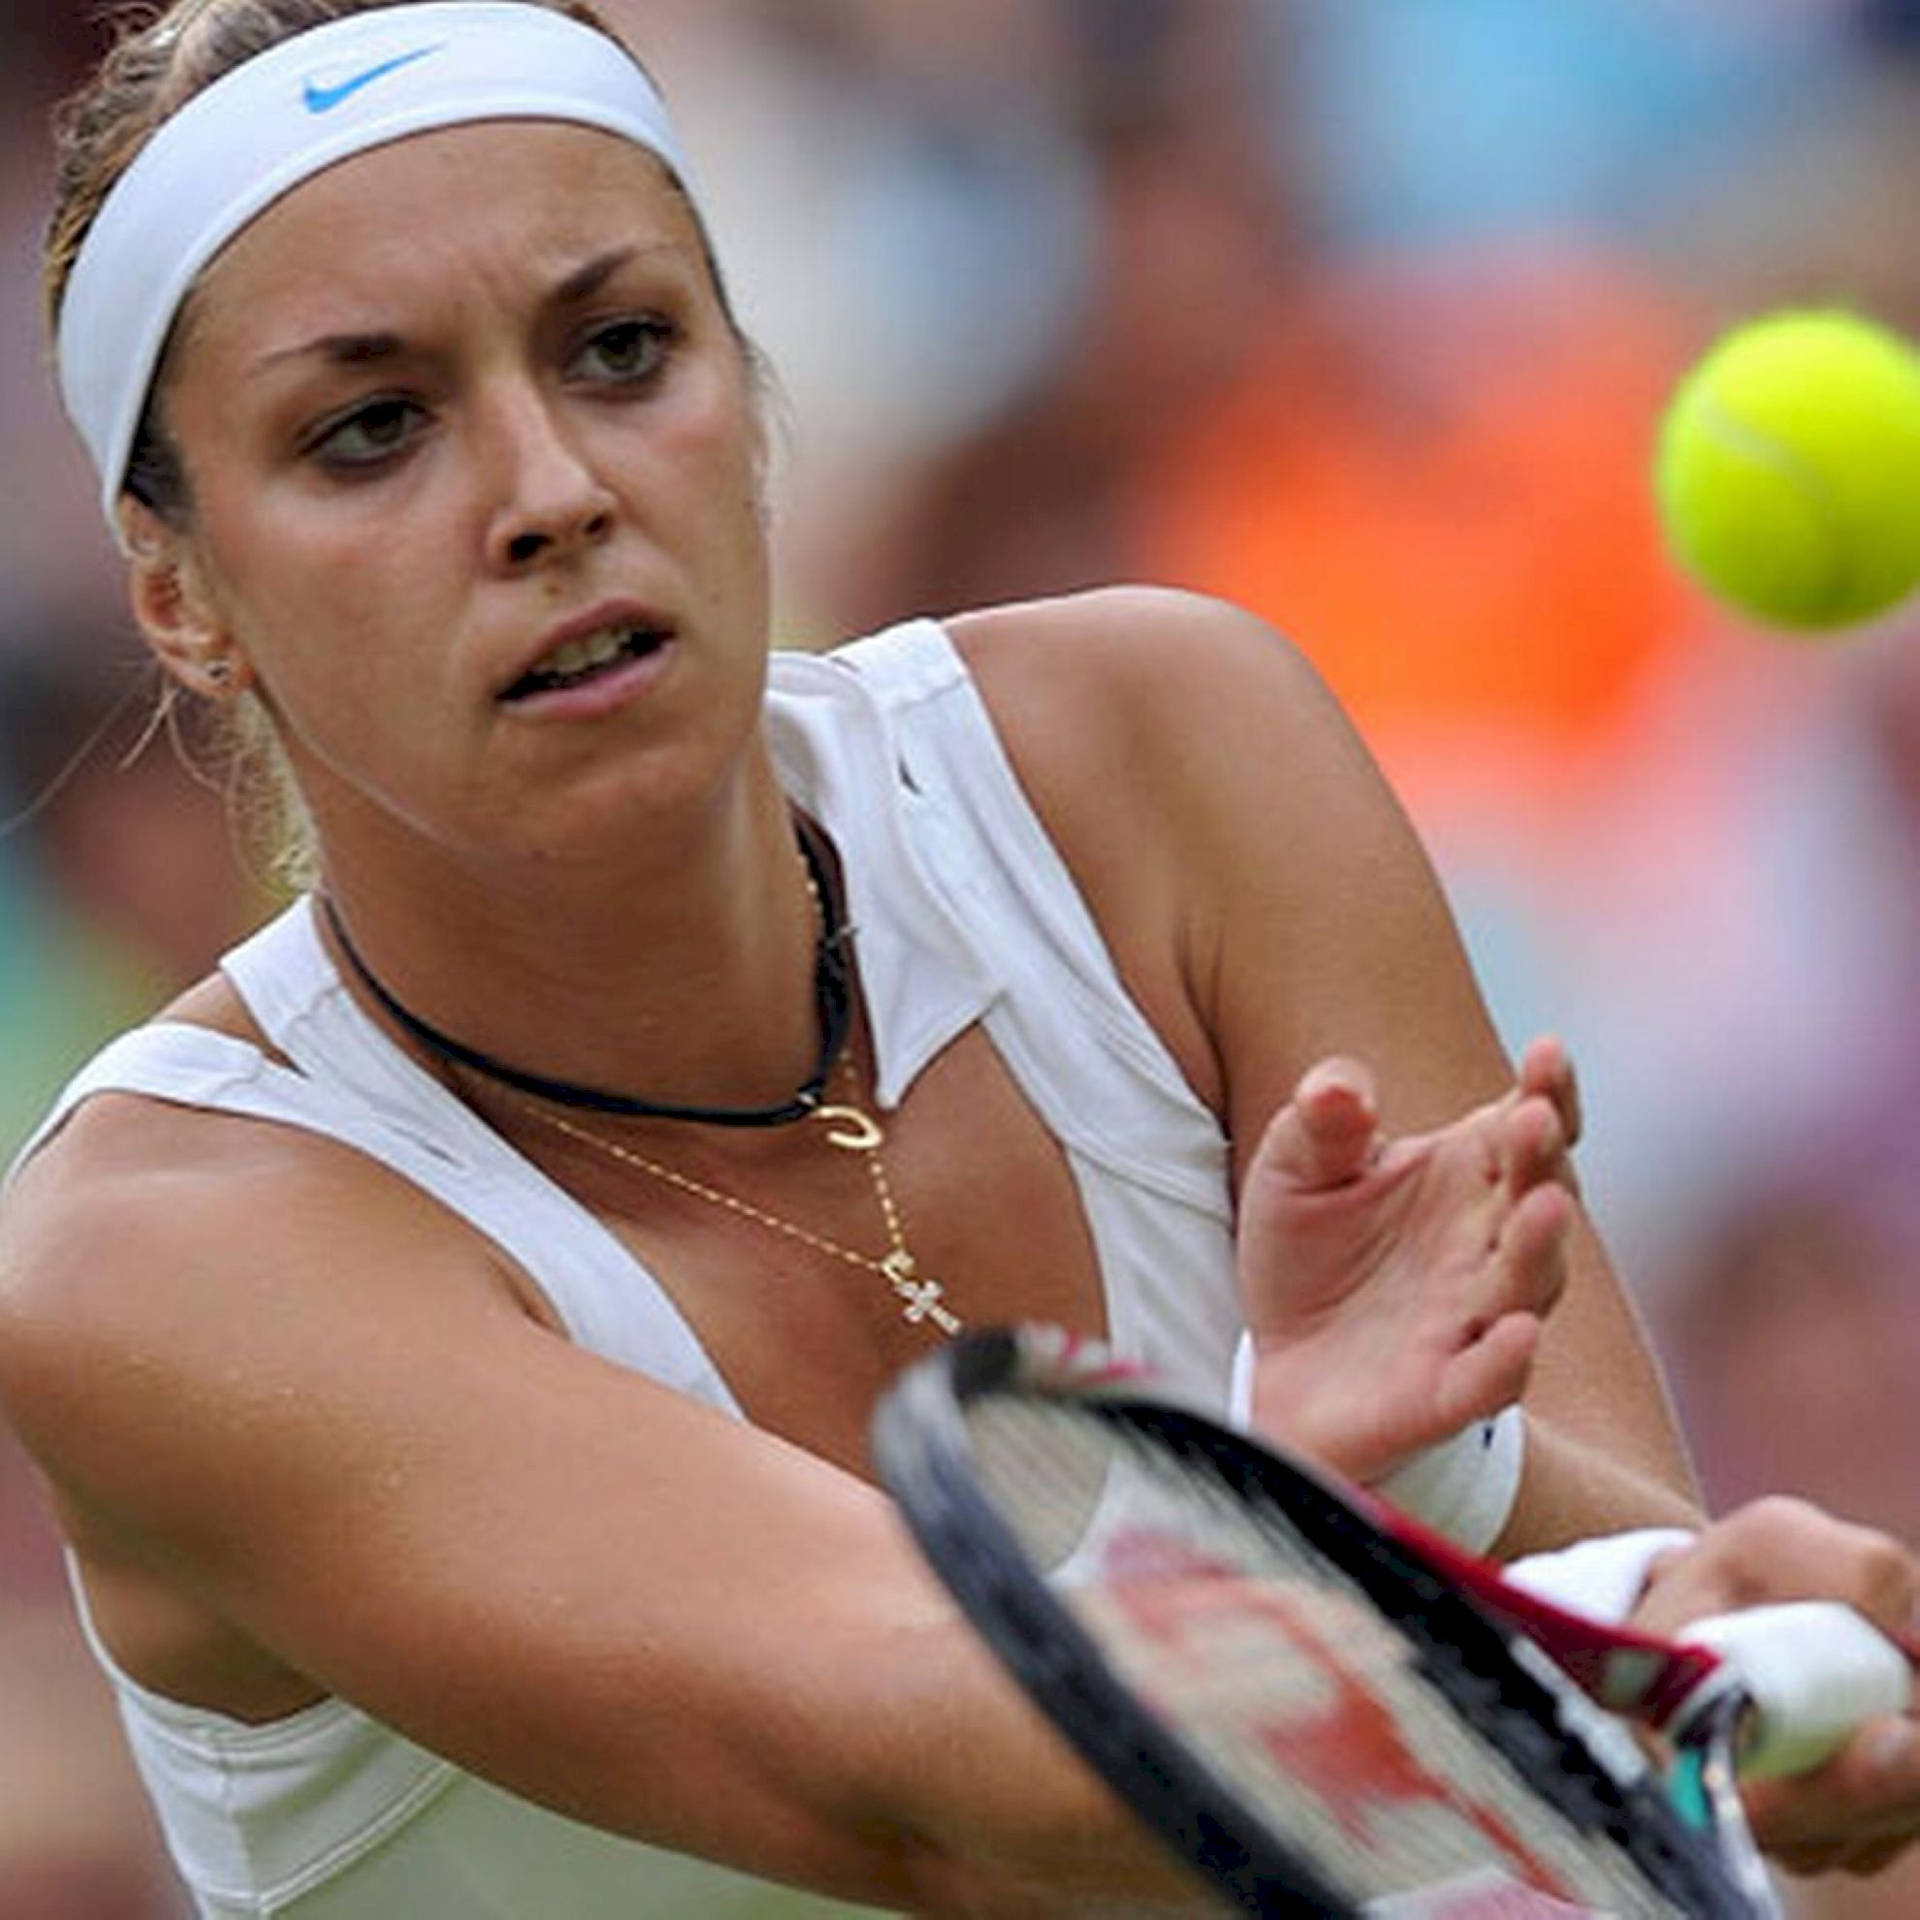 Sabine Lisicki dynamically catches the tennis ball on the court Wallpaper